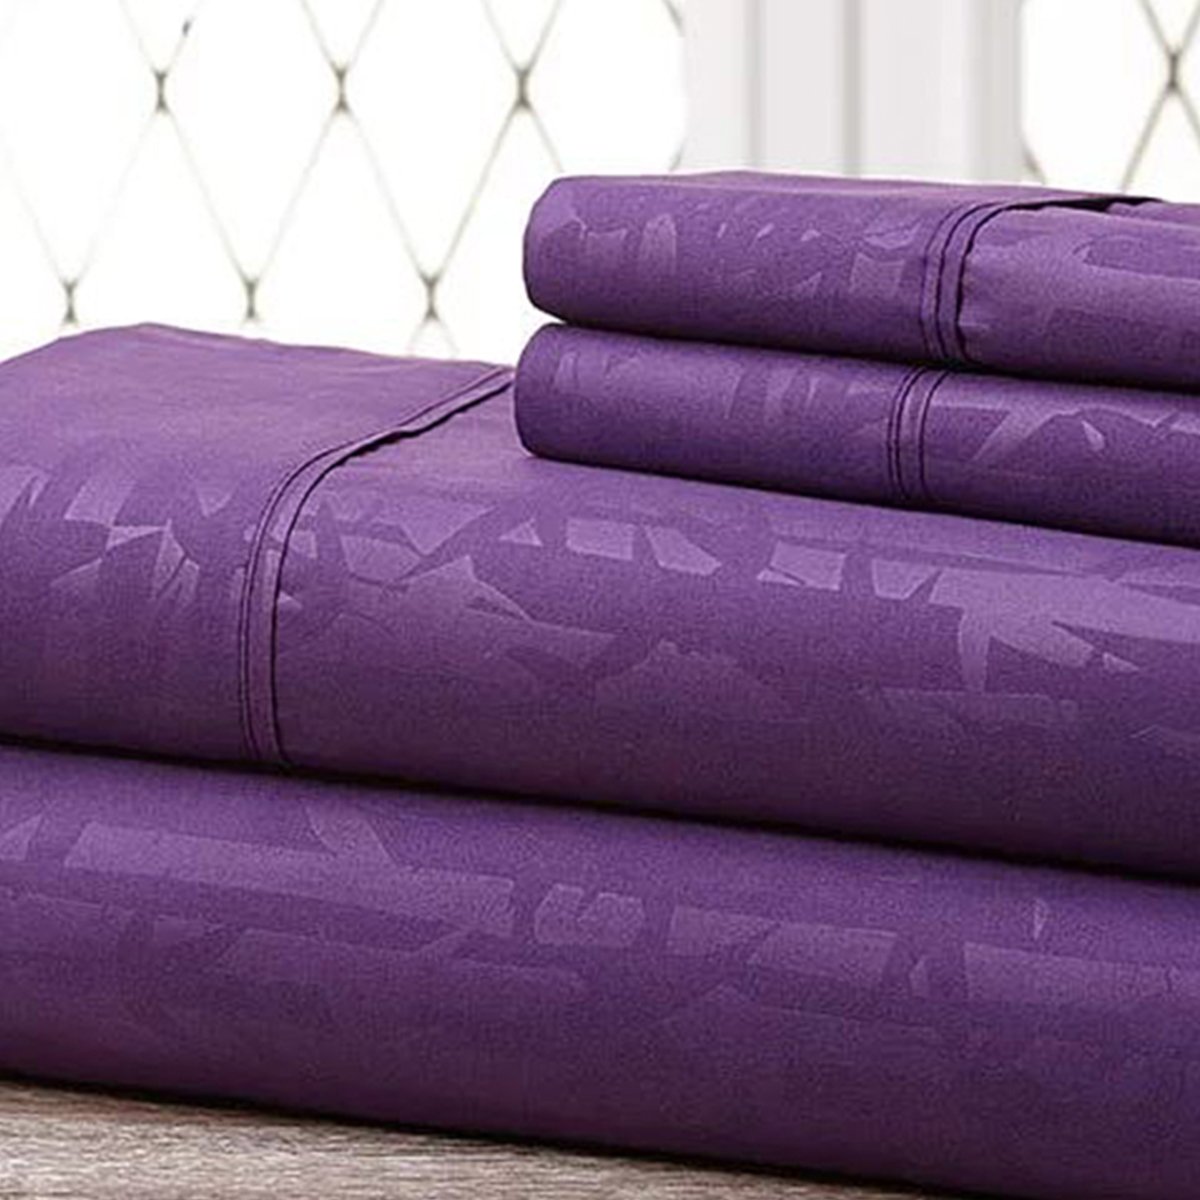 Super-soft 1600 Series Bamboo Embossed Bed Sheet, Purple - Full, 4 Piece